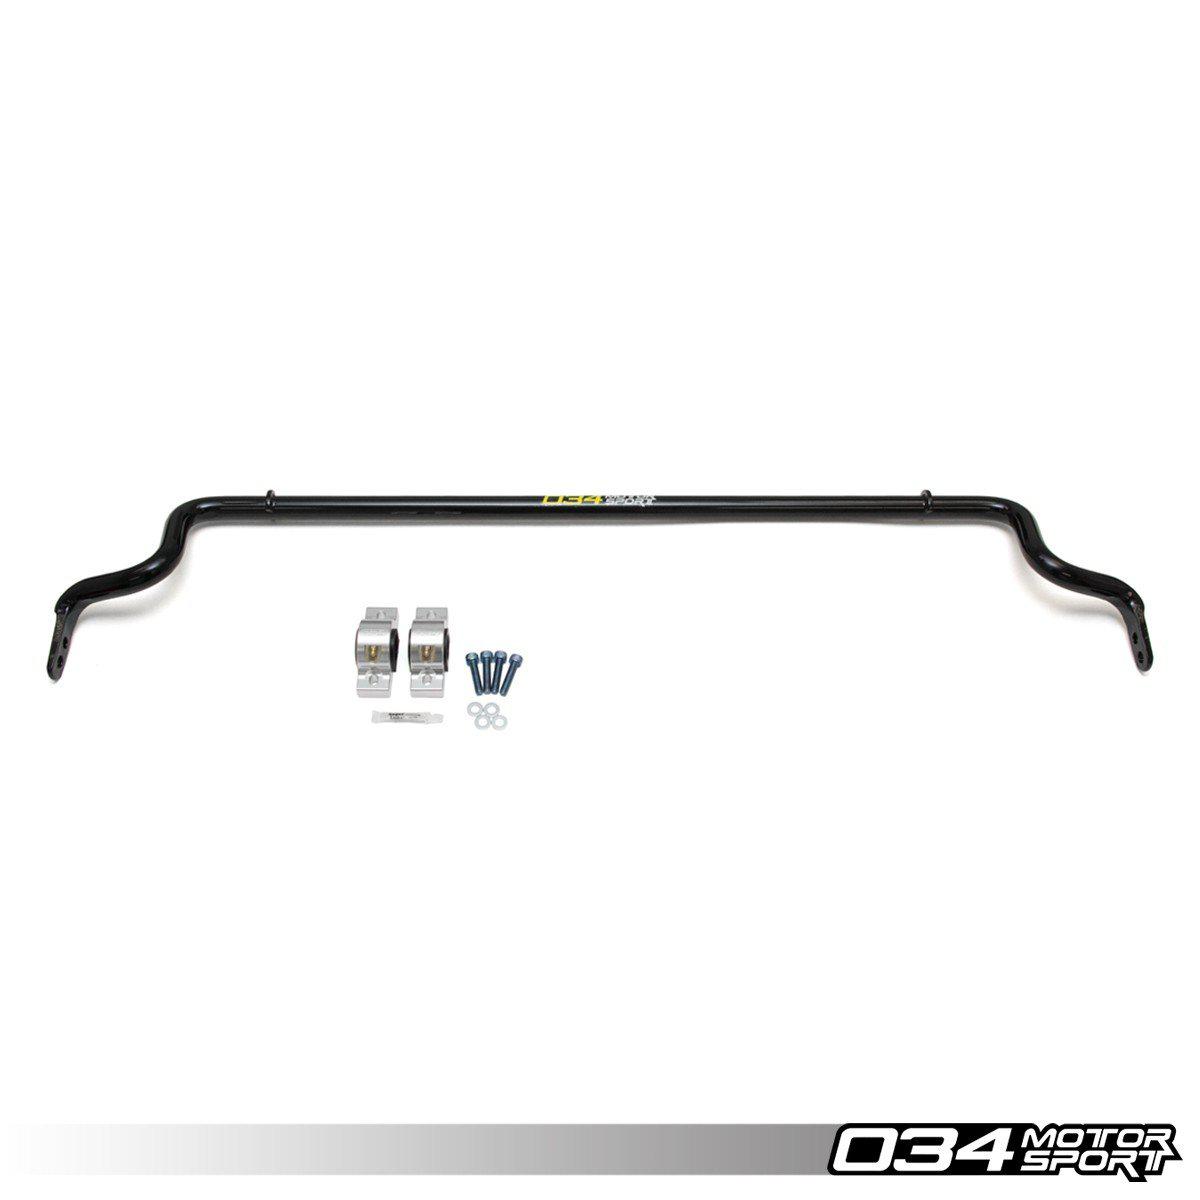 Adjustable Solid Rear Sway Bar, B8/B8.5 Audi Q5/SQ5 & C7/C7.5 A6/S6/RS6/A7/S7/Rs7-A Little Tuning Co